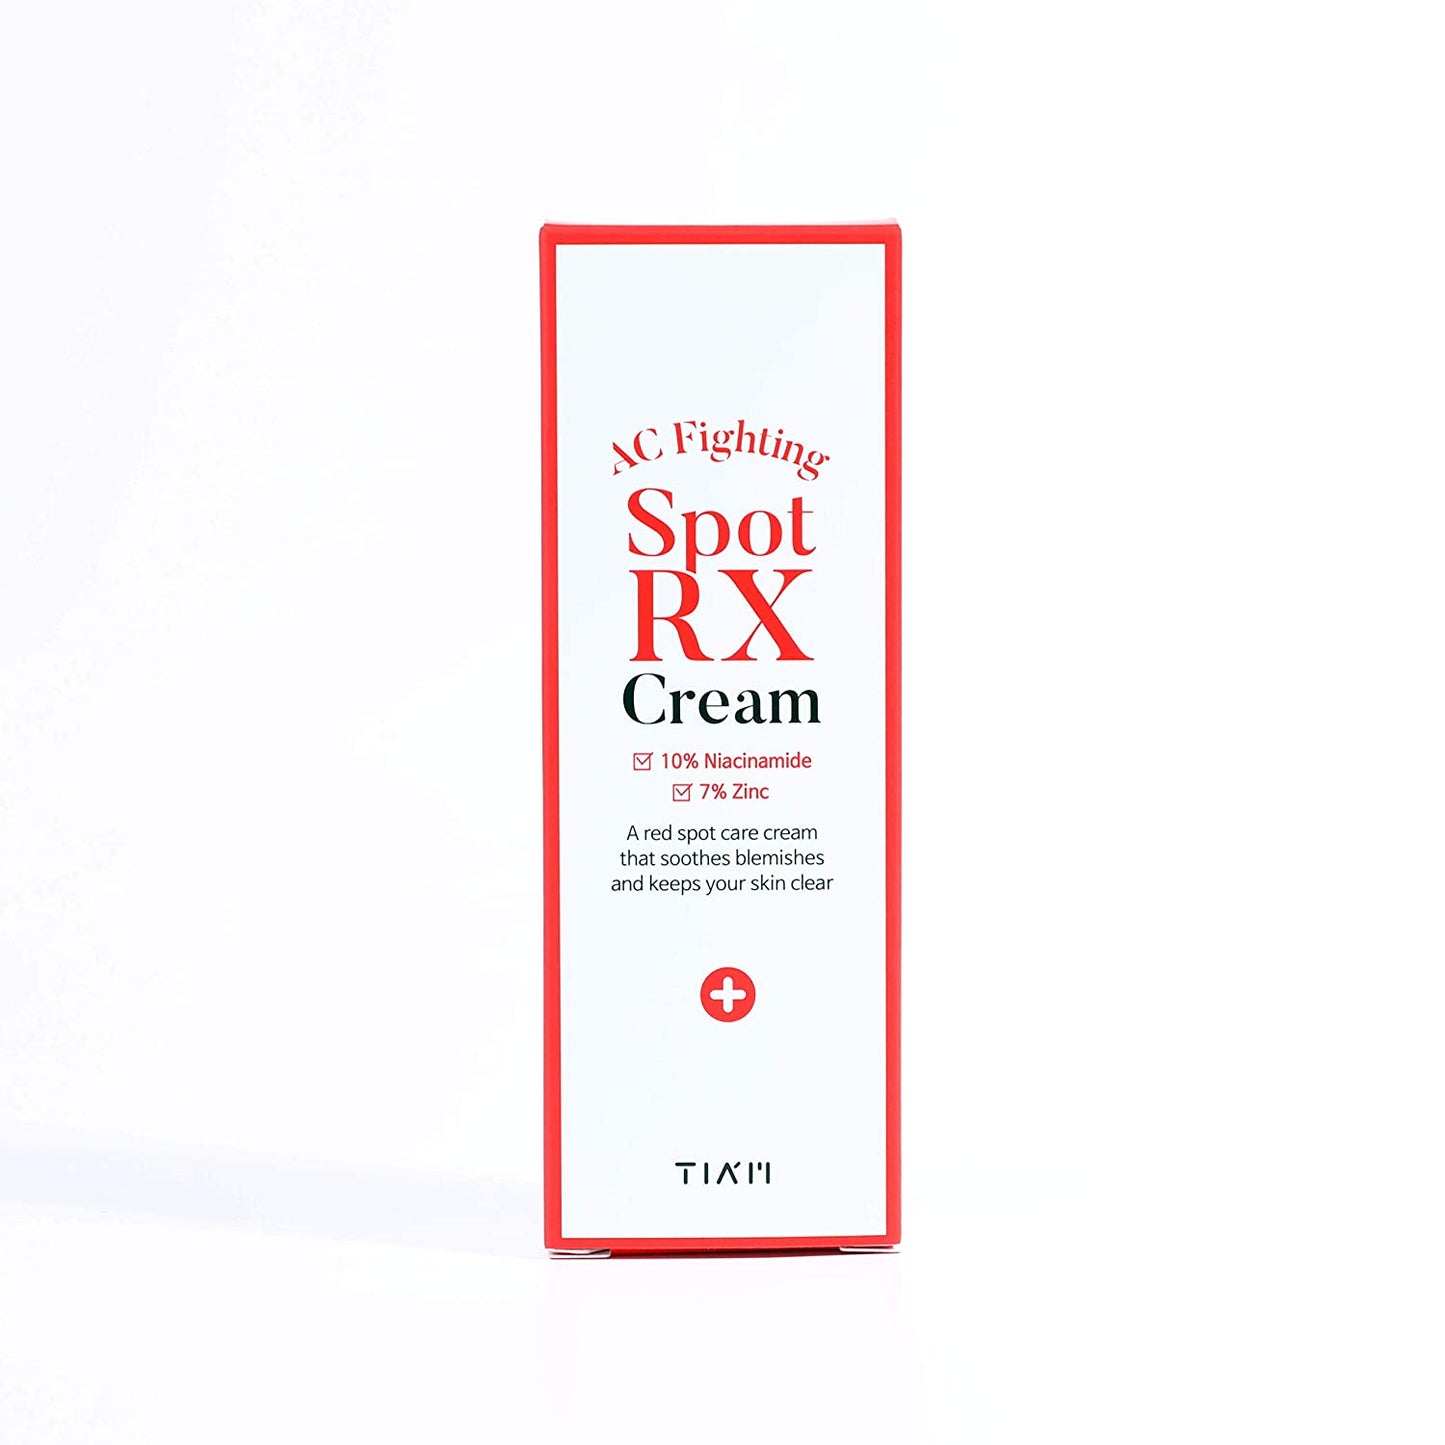 TIAM AC Fighitng Spot RX Cream, Acne-Prone Skin, Acne Spot Treatment, Intensive Nourishing and Calming for Dry, Red-Looking Skin After a Blemish, 1 Oz